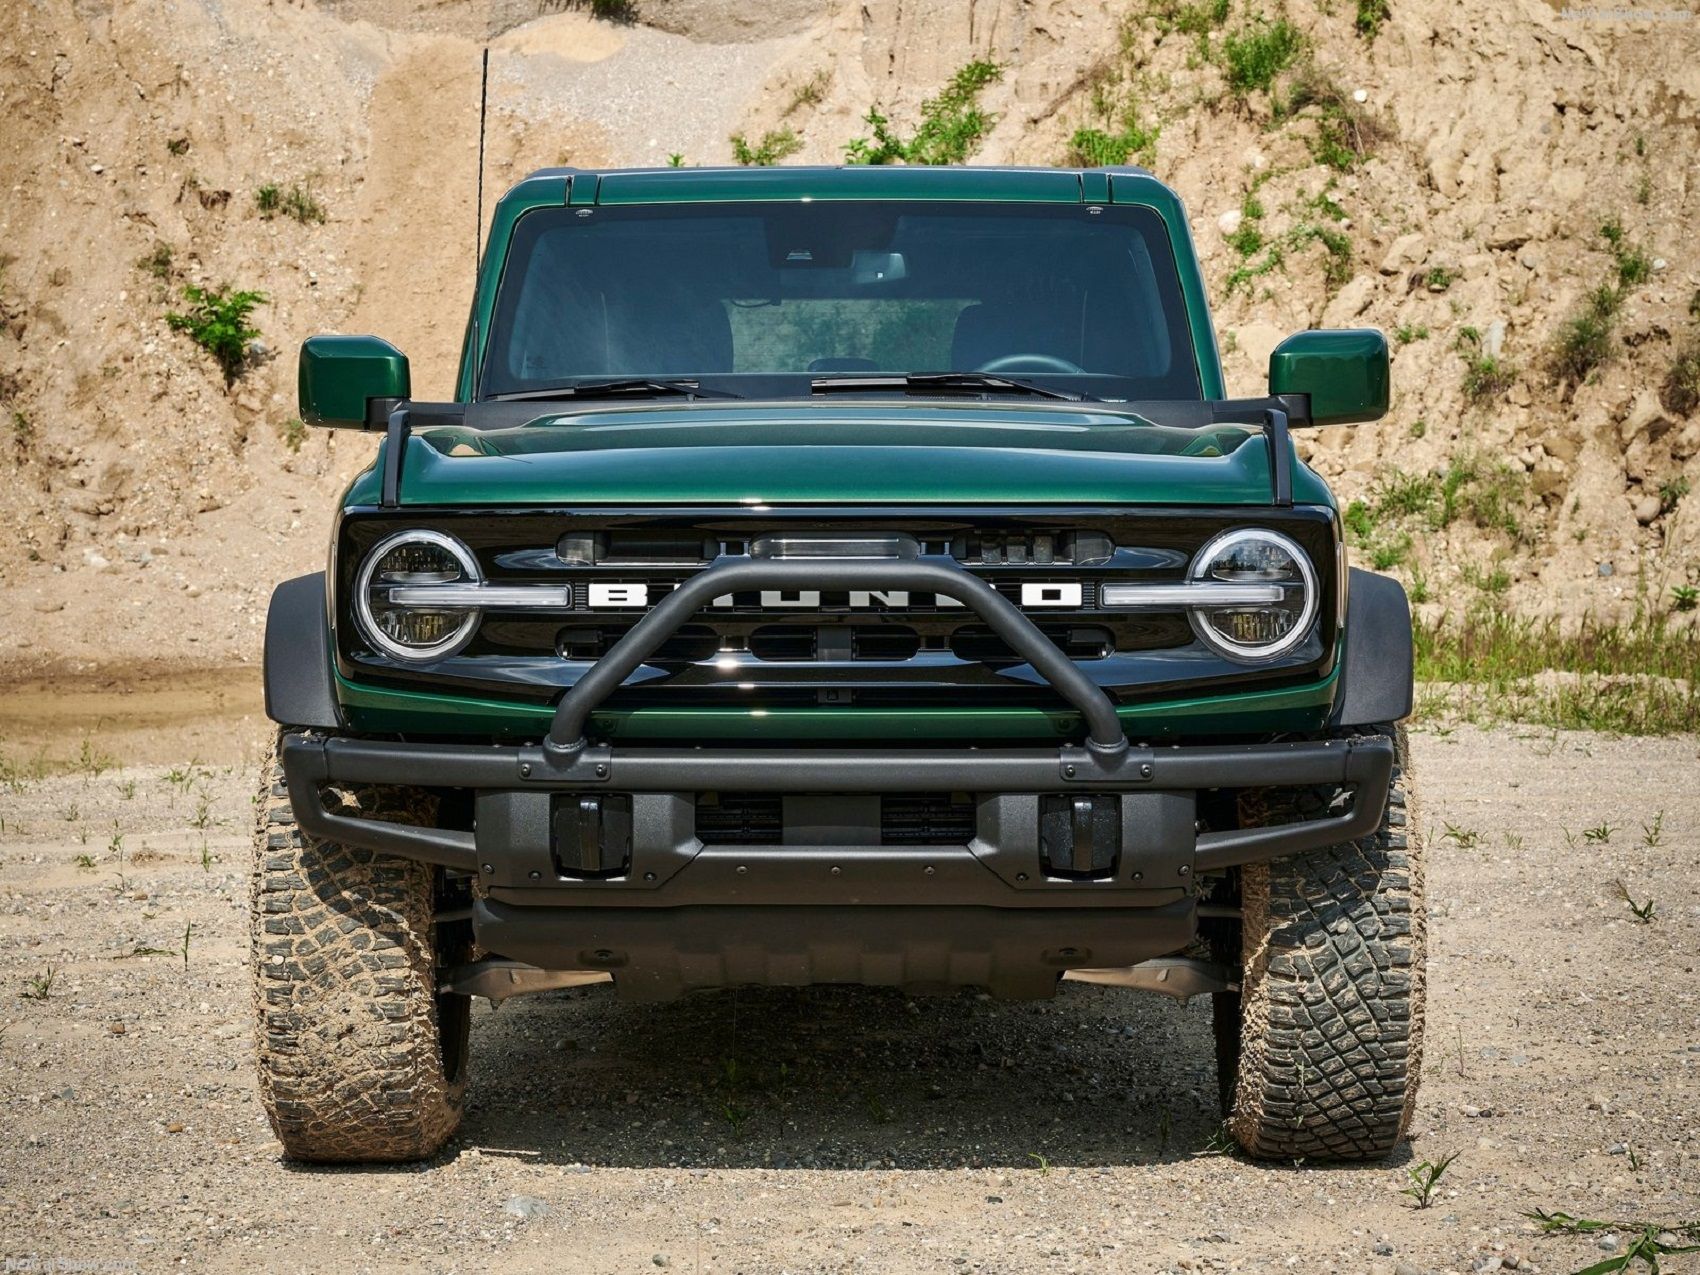 2022 Ford Bronco 4 door, green, front profile view